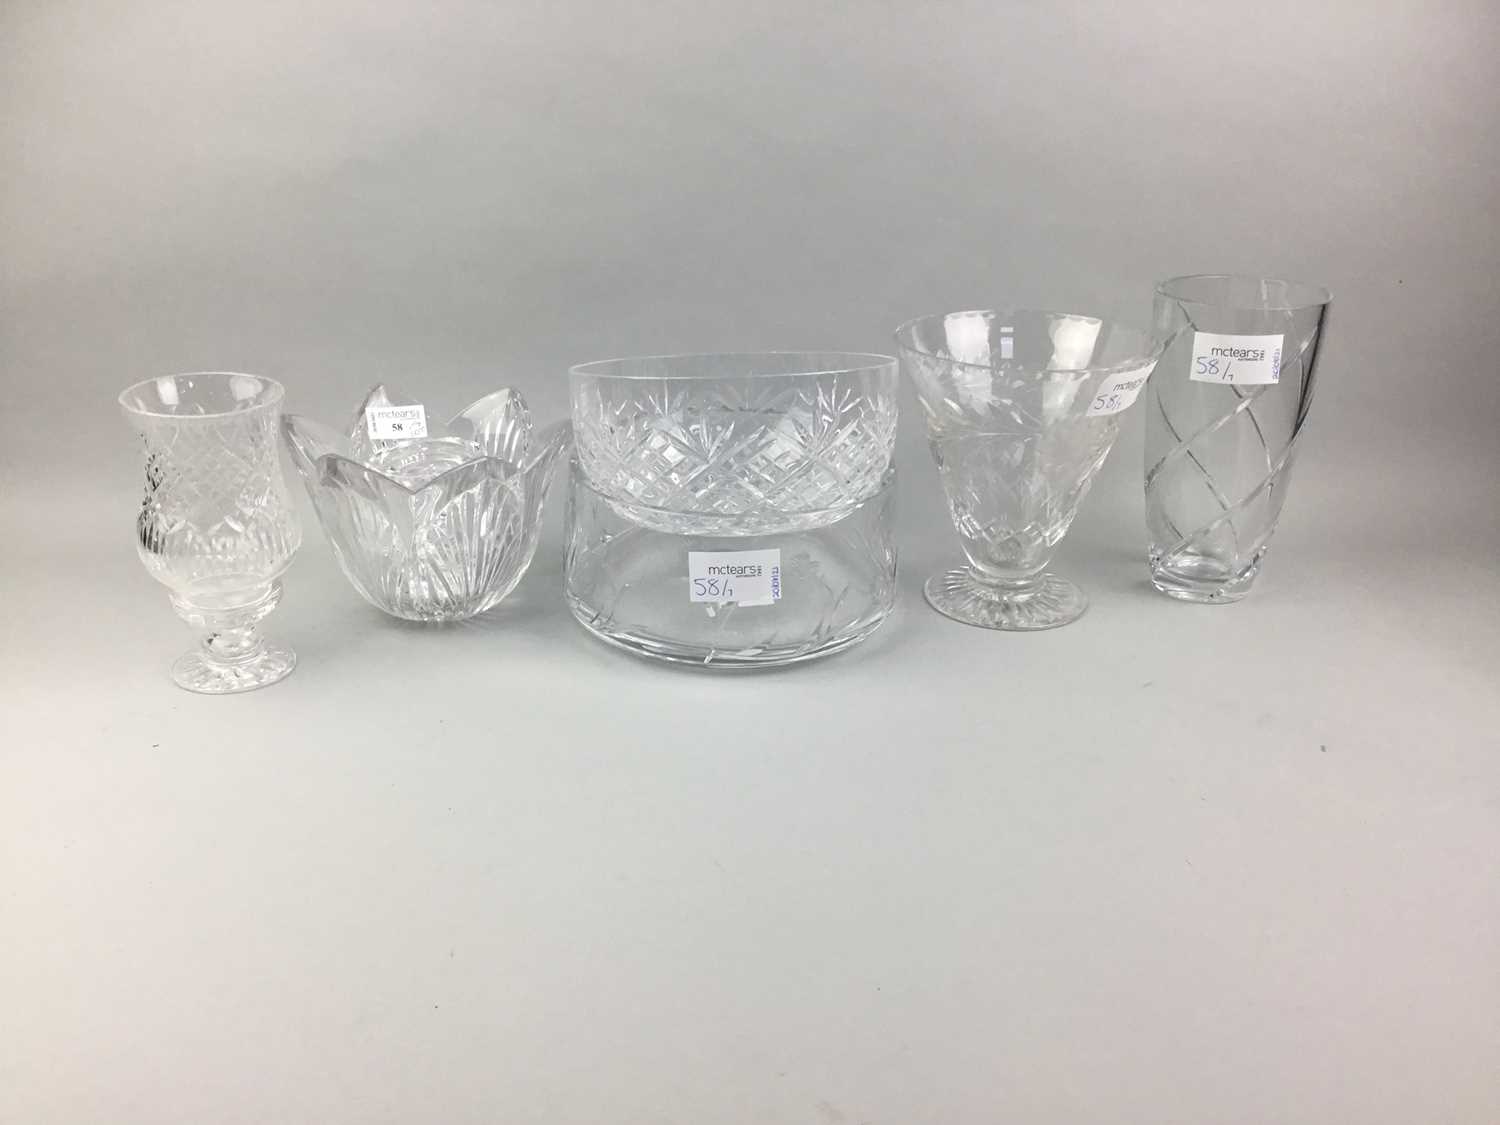 Lot 58 - A WATERFORD CRYSTAL FLOWER FORMED VASE ALONG WITH OTHER CRYSTAL WARE